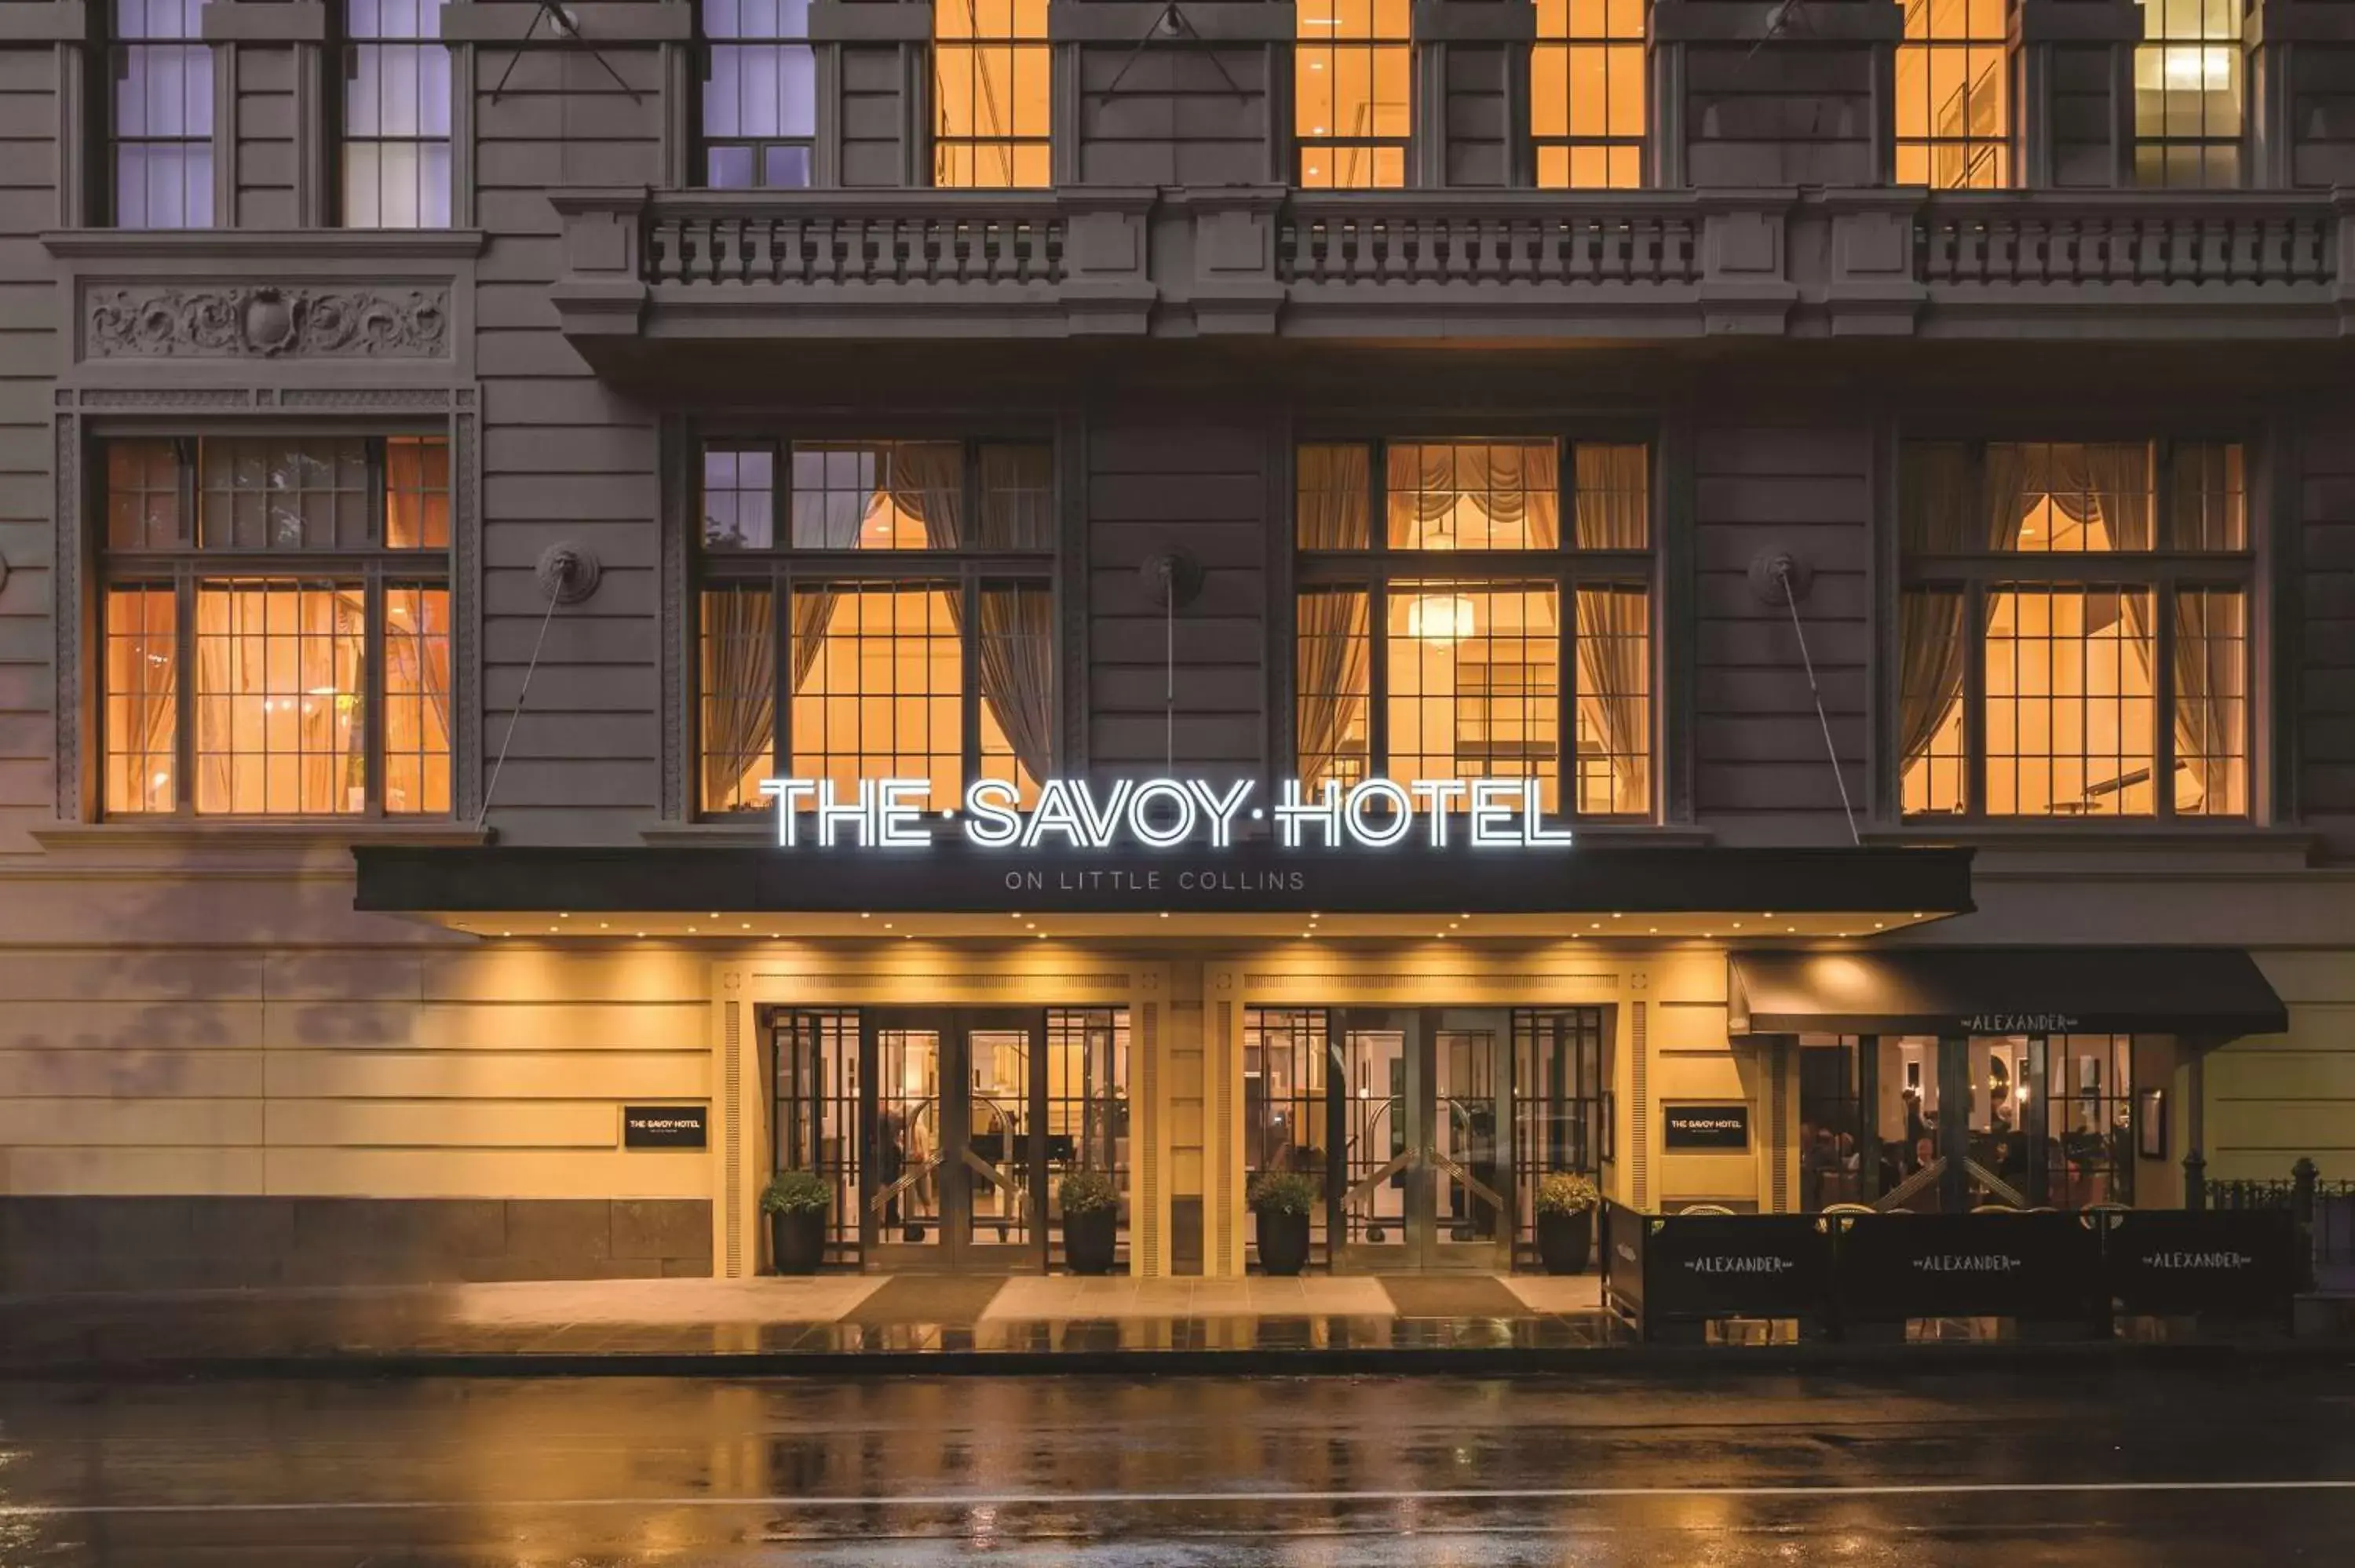 Property Building in The Savoy Hotel on Little Collins Melbourne